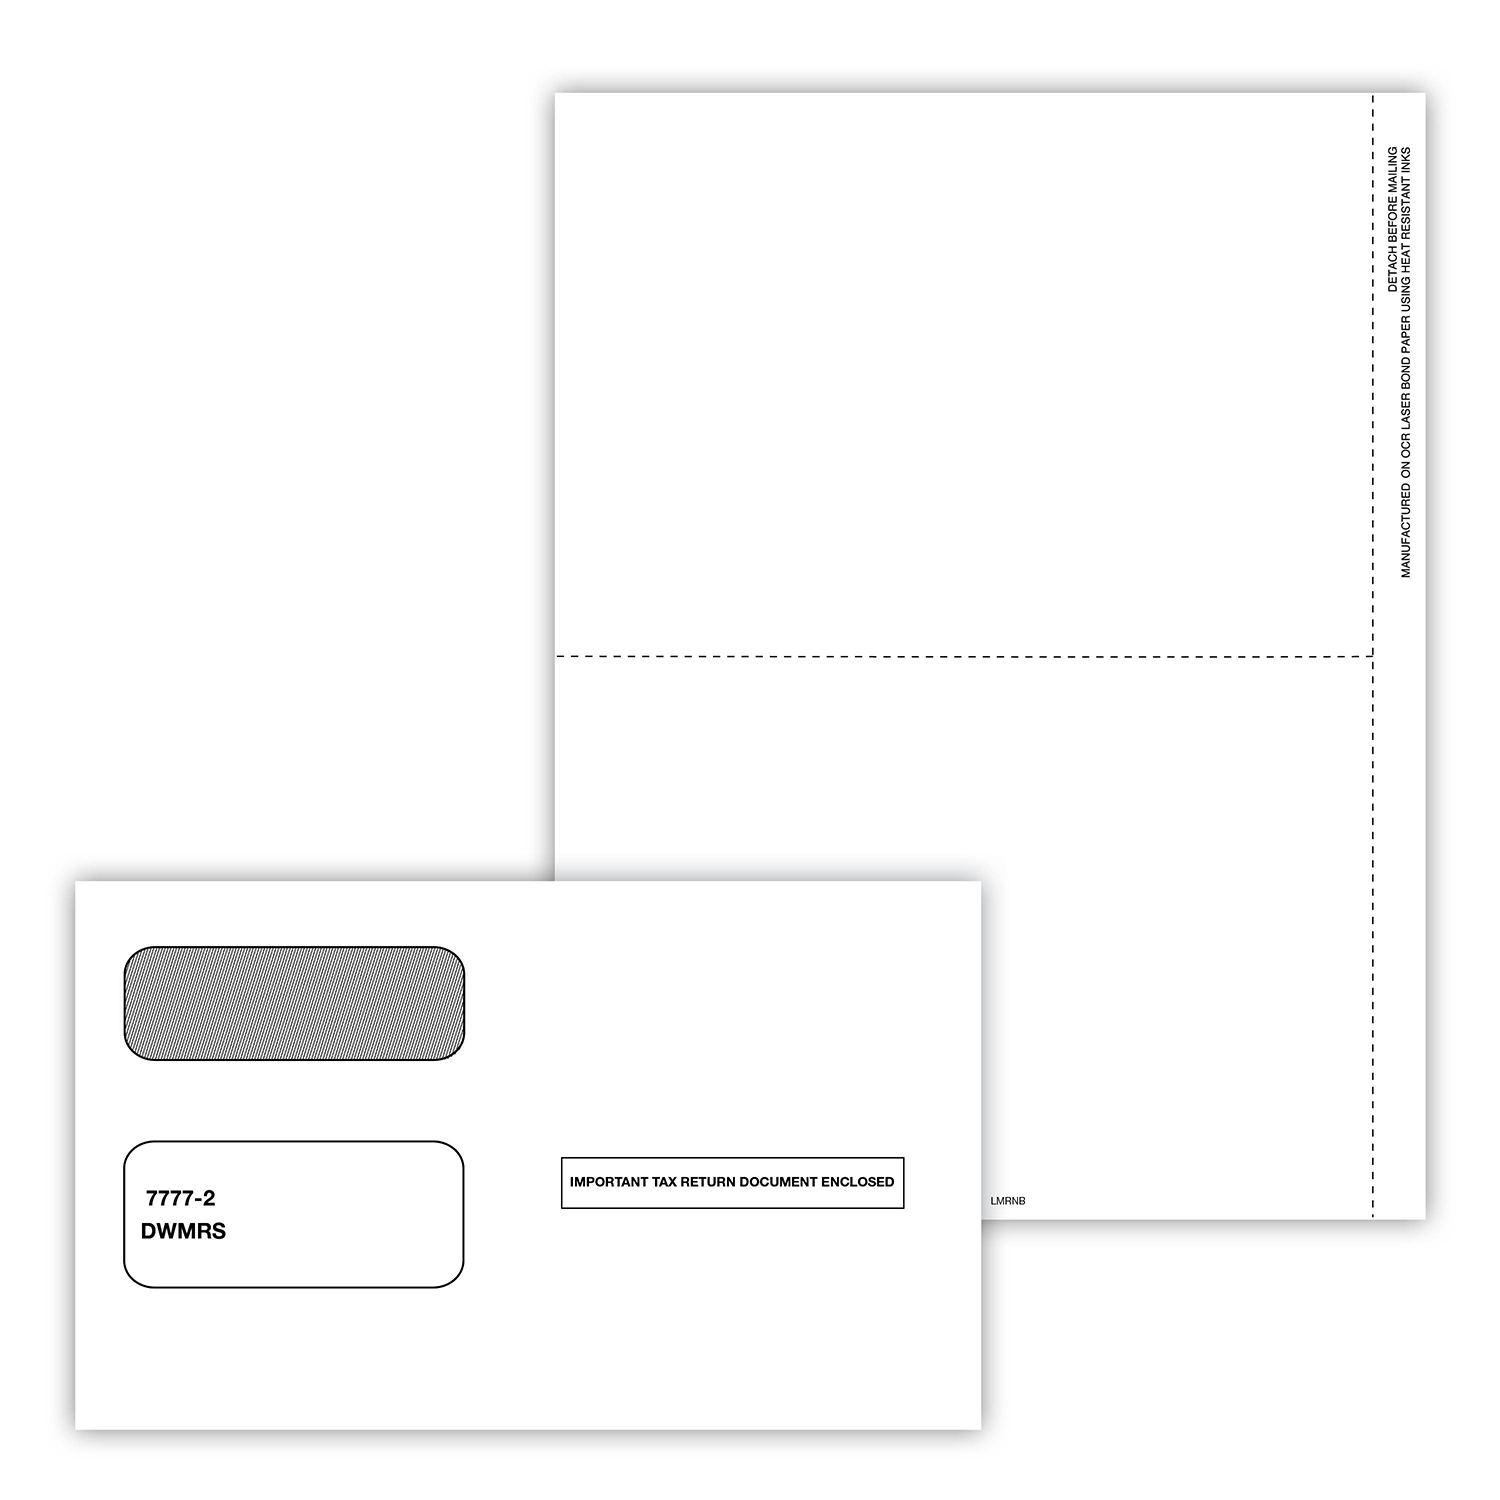 Picture of 1099-MISC Blank Recipient Copy (Only), 3-Part with Envelopes (25 Pack)